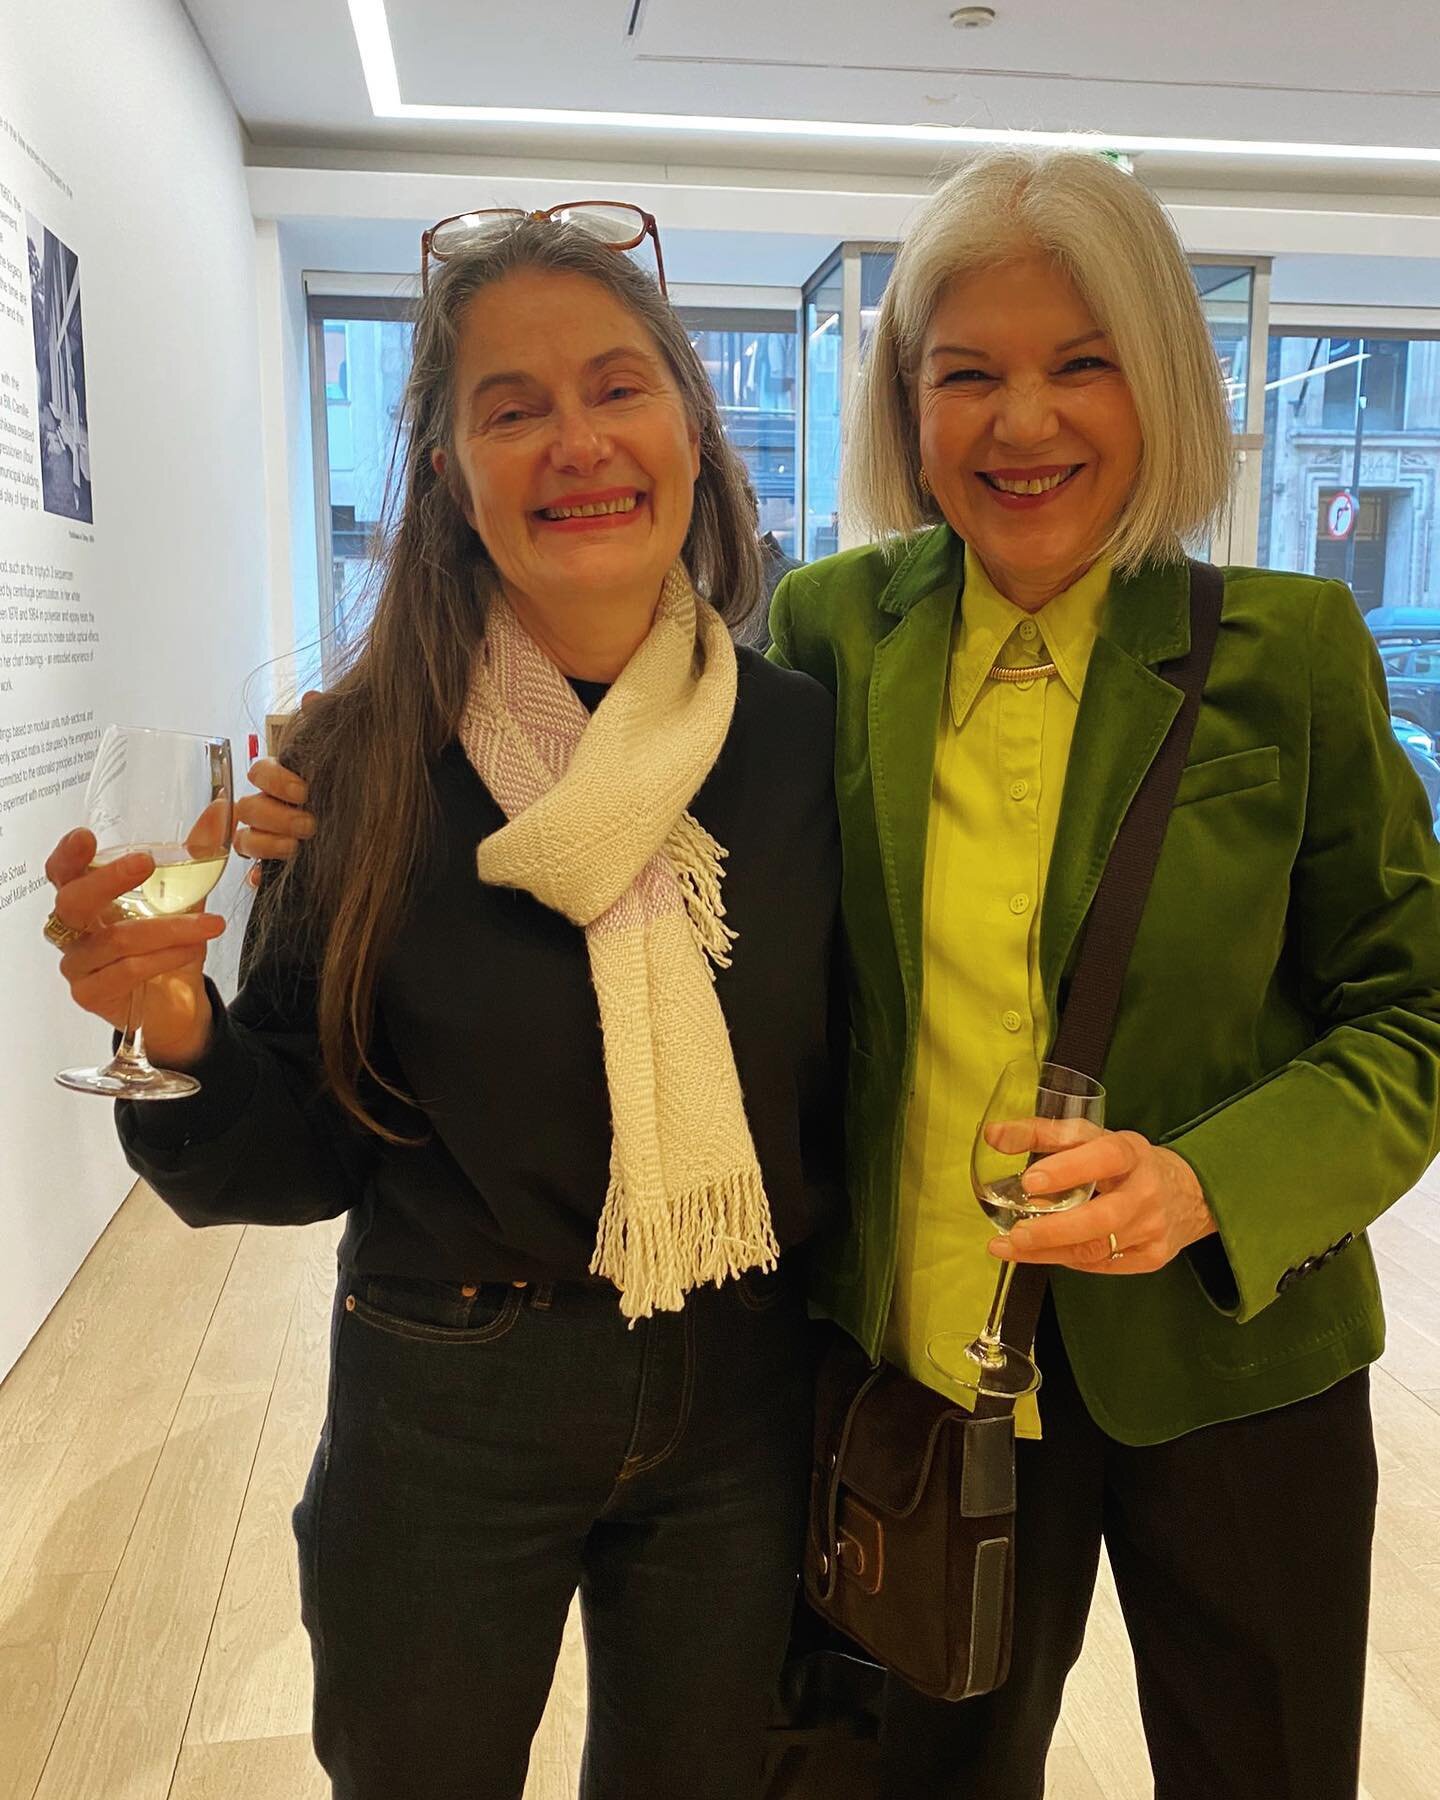 A wonderful evening at Marlborough Gallery celebrating Shizuko Yoshikawa and Nancy Haynes 🍾

Thank you so much Mary and team for organising such a fab dinner, and what a pleasure to be joined by close friend and fellow art advisor Michelle D&rsquo;S